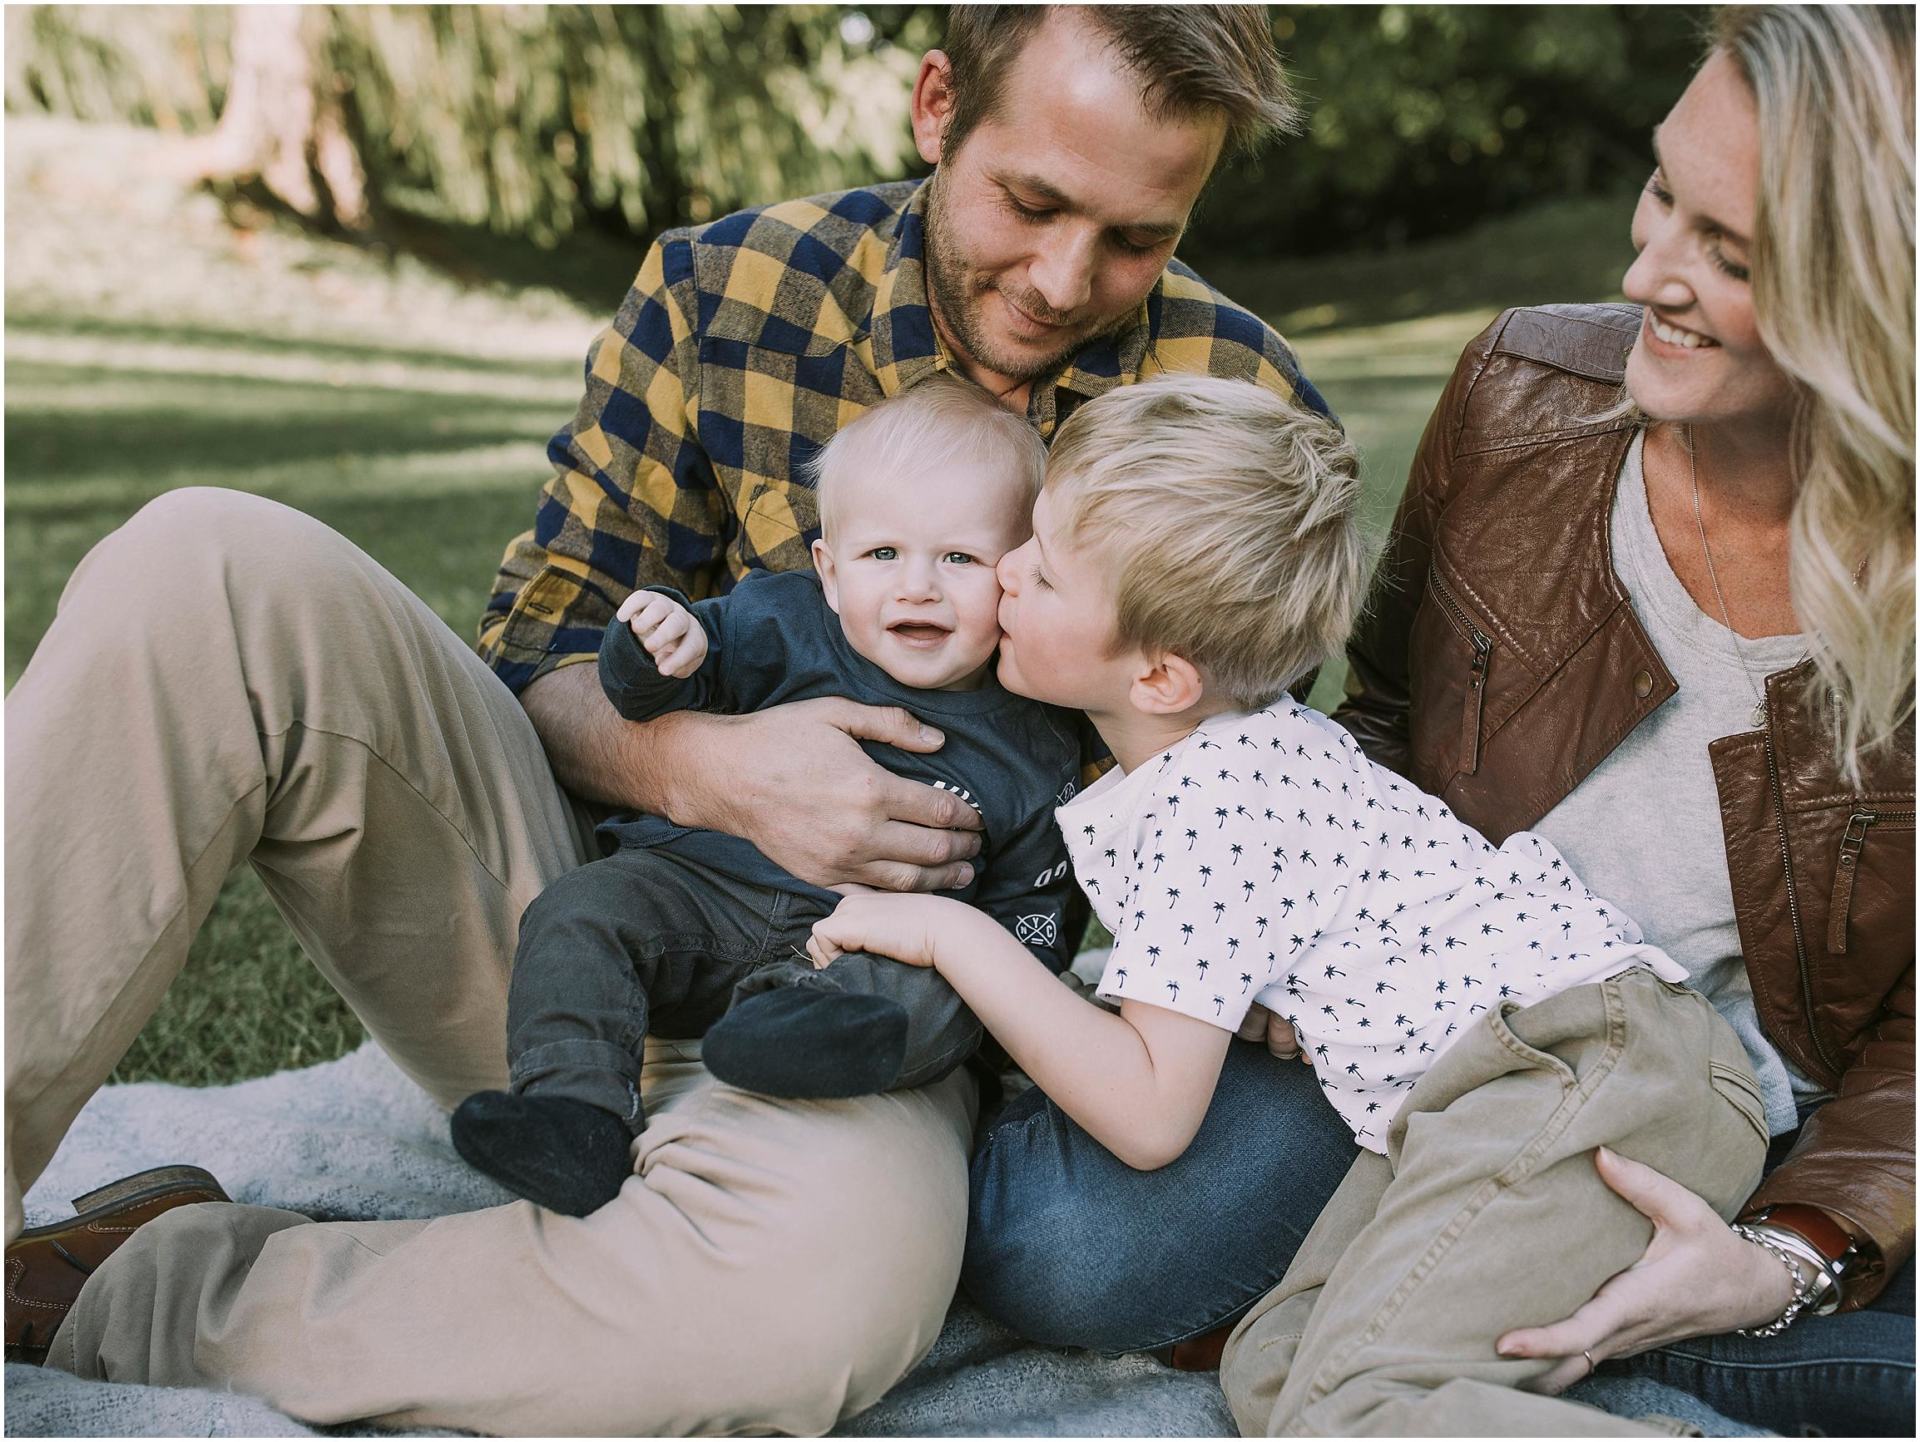 Charlotte Kiri Photography - Family Photography of a couple smiling as they watch their young son lean over to kiss his baby brother, as they sit on a picnic blanket in a garden in Wanaka, New Zealand.